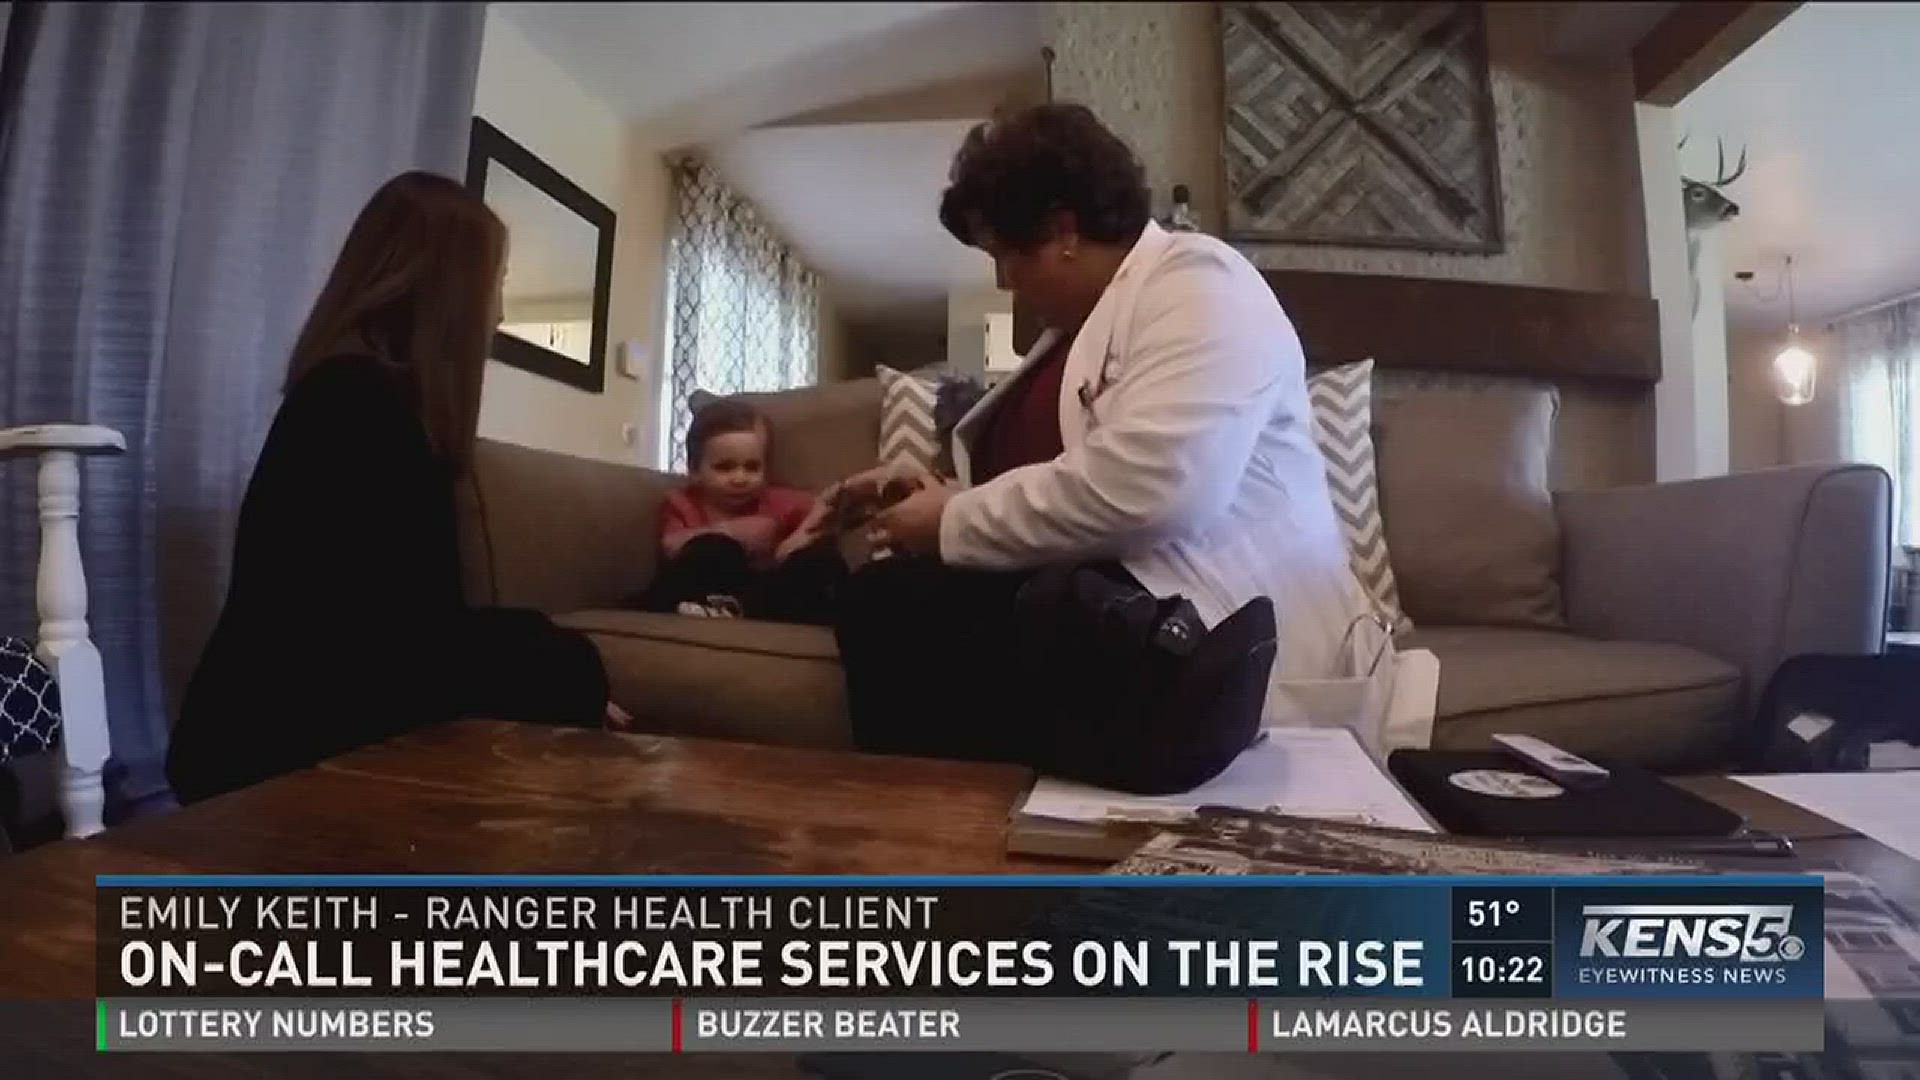 On-call healthcare services on the rise